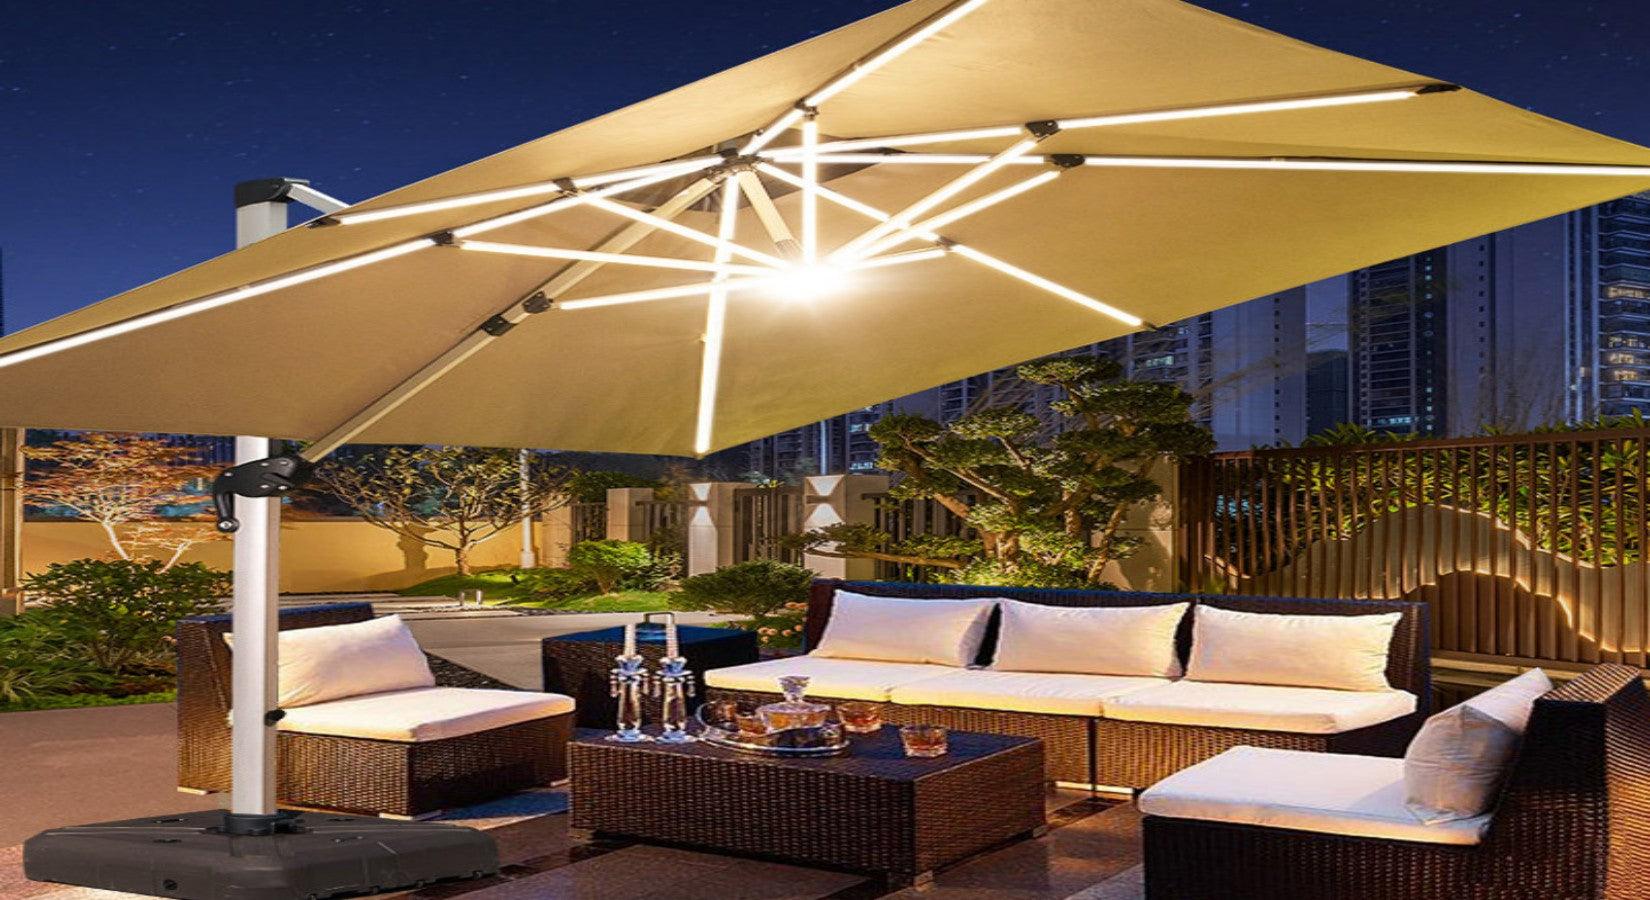 A combination of unique design and practicality - the charm of the cantilever umbrella - Parasol